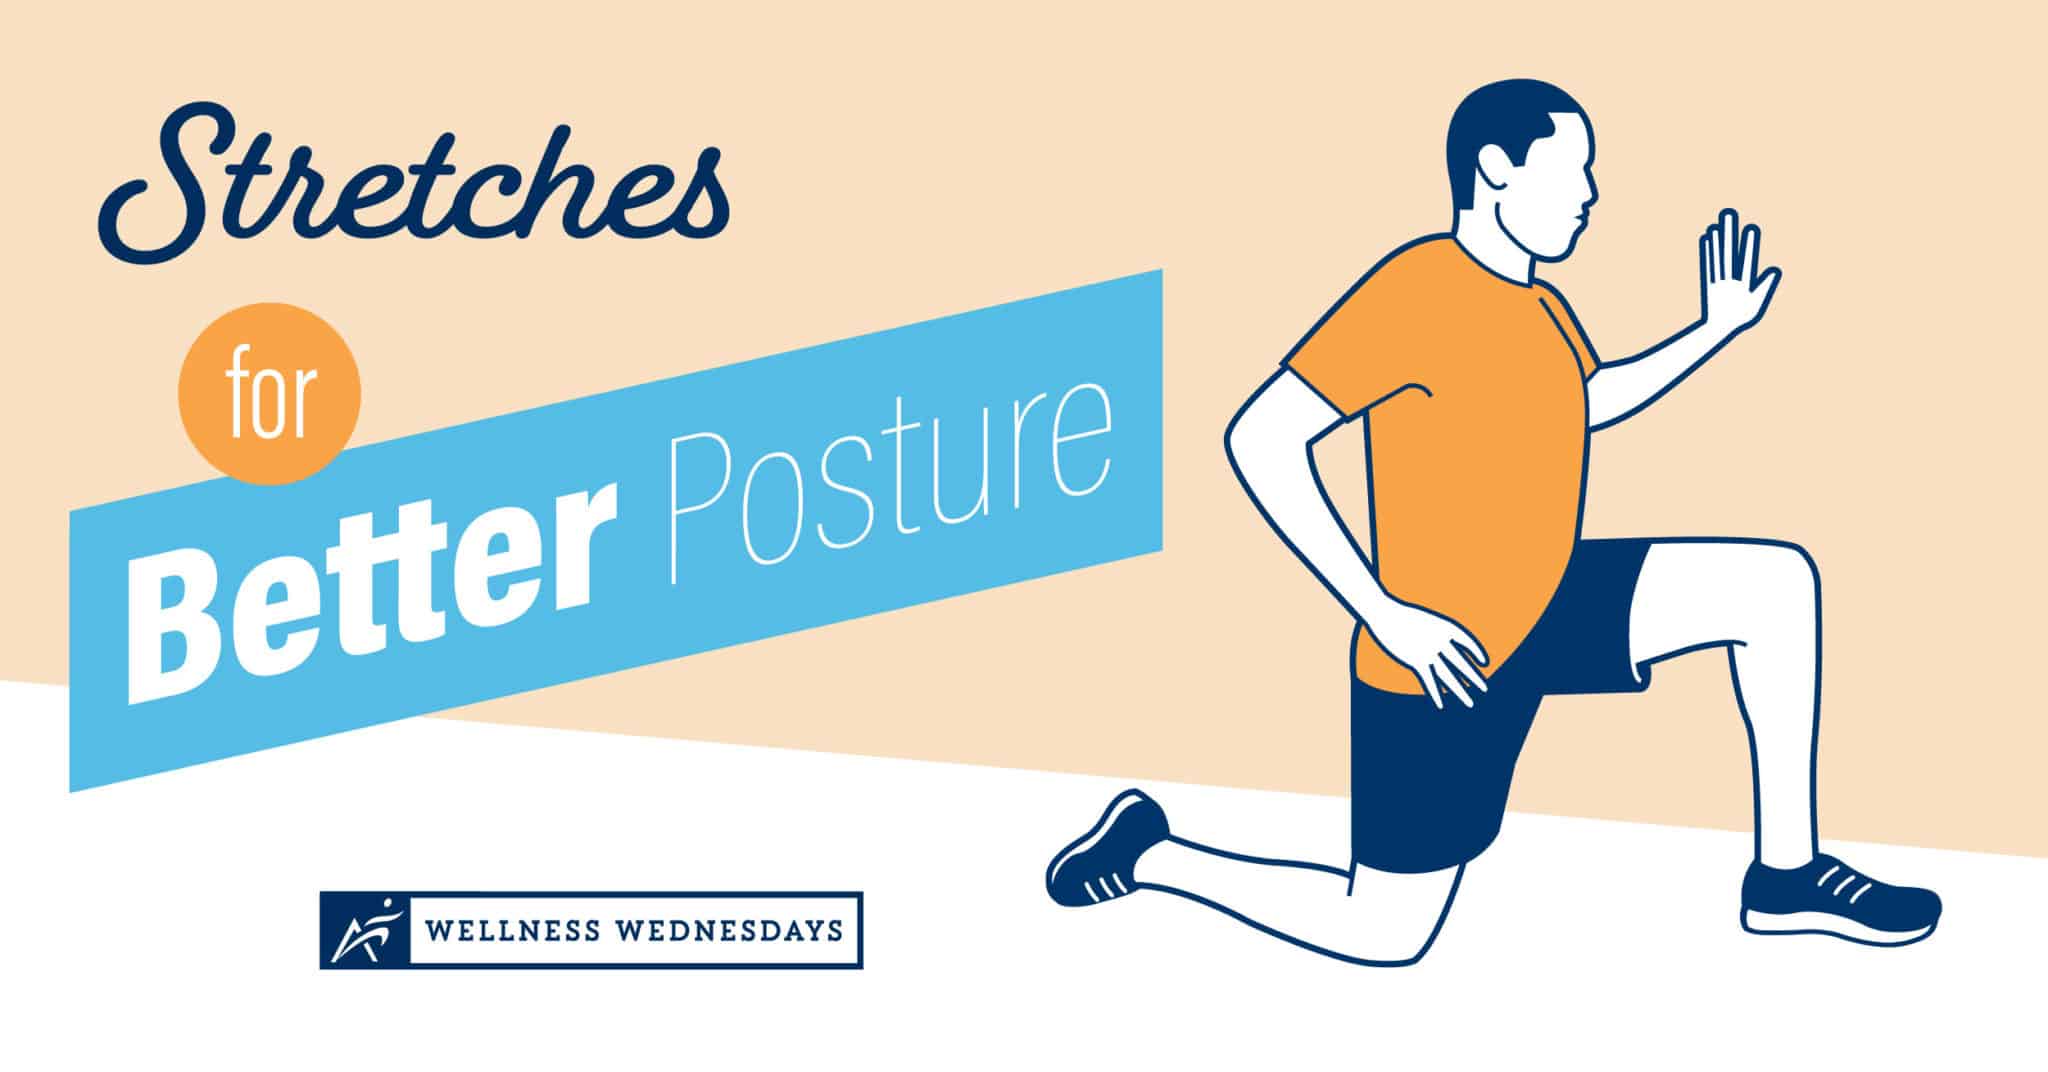 Stretches for Better Posture